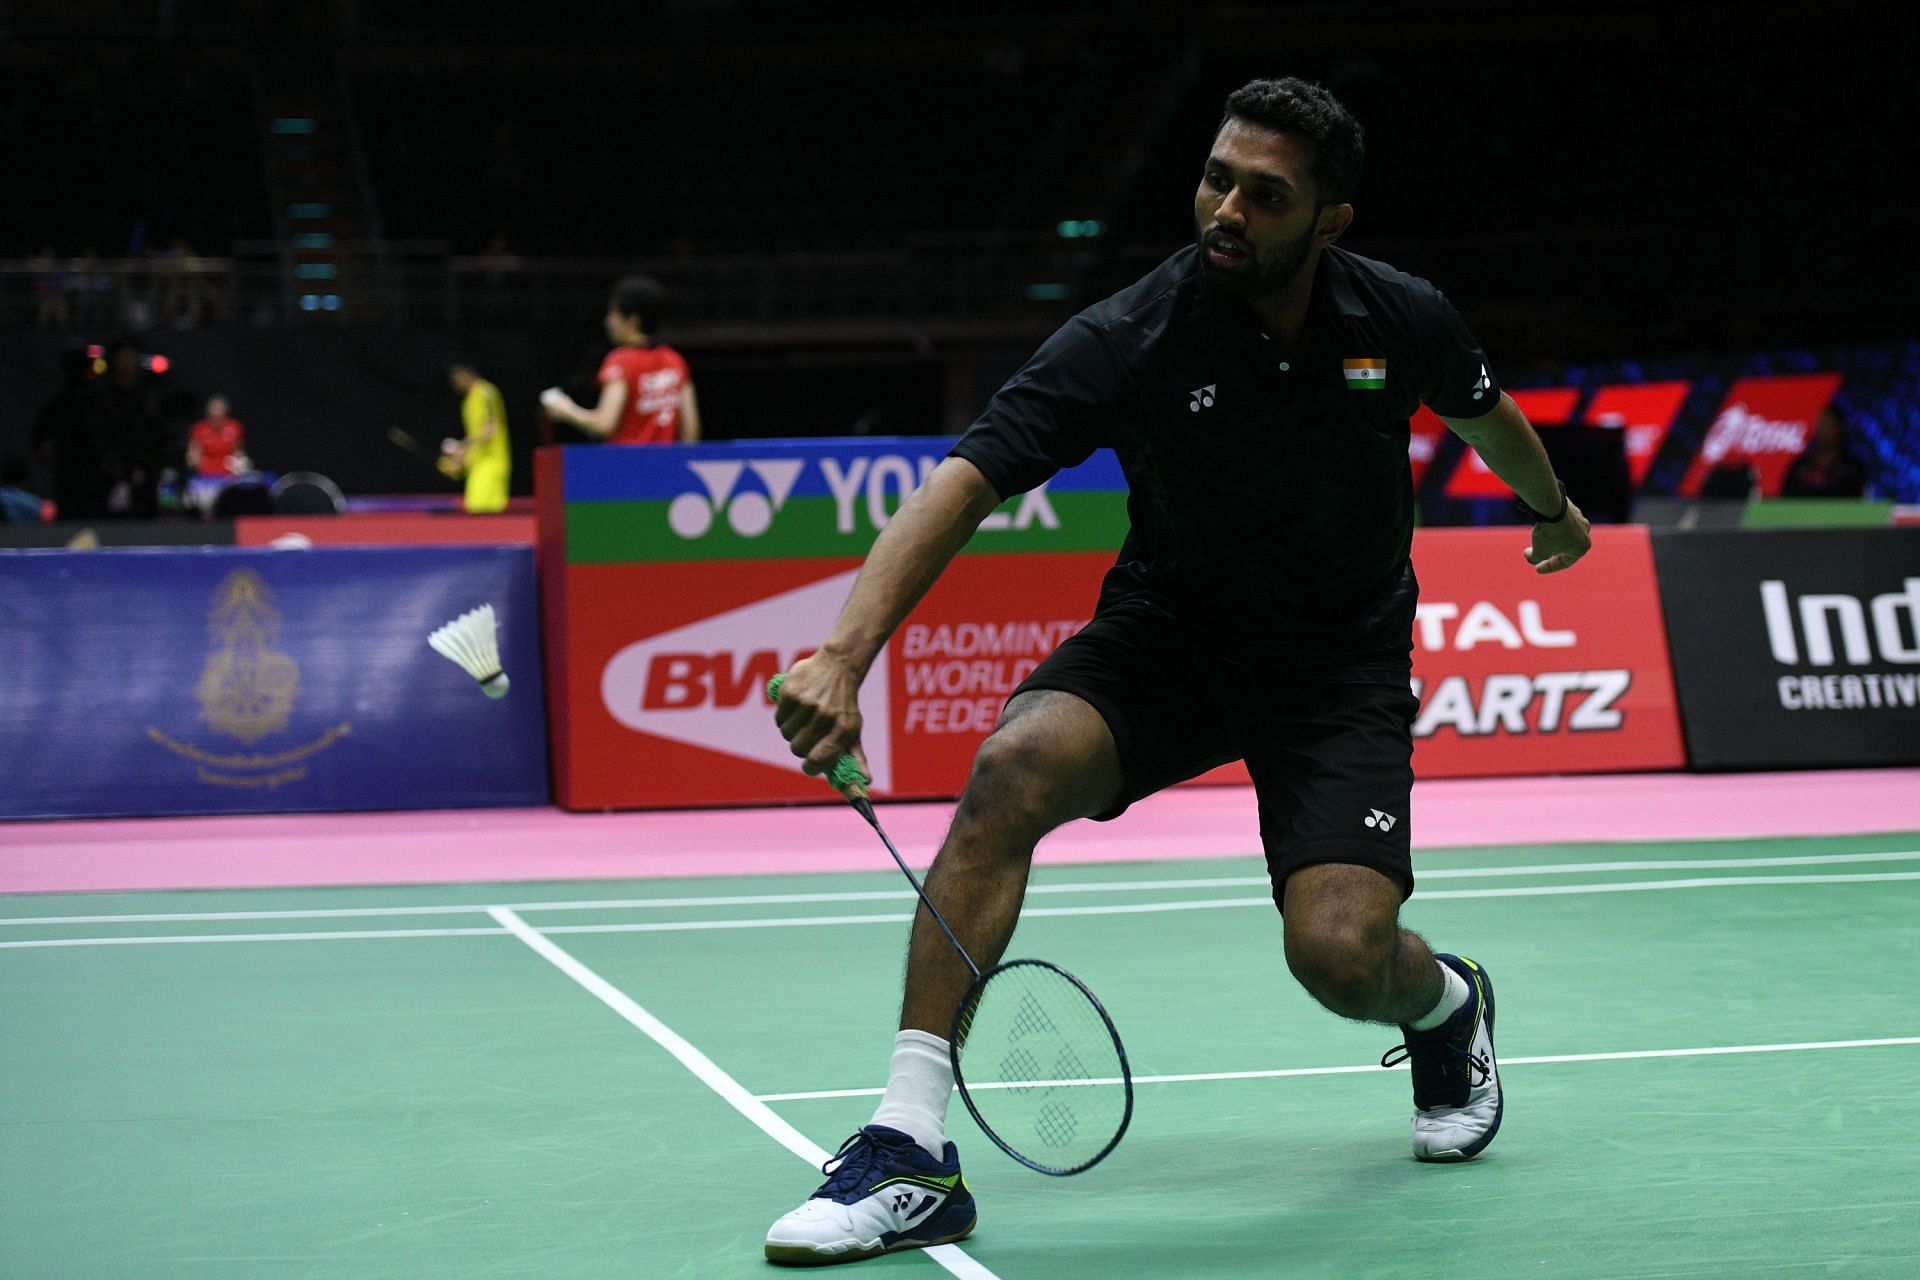 BWF World Championships 2021 Day 4 Schedule for Indian shuttlers, where to watch, live stream details, TV schedule and more